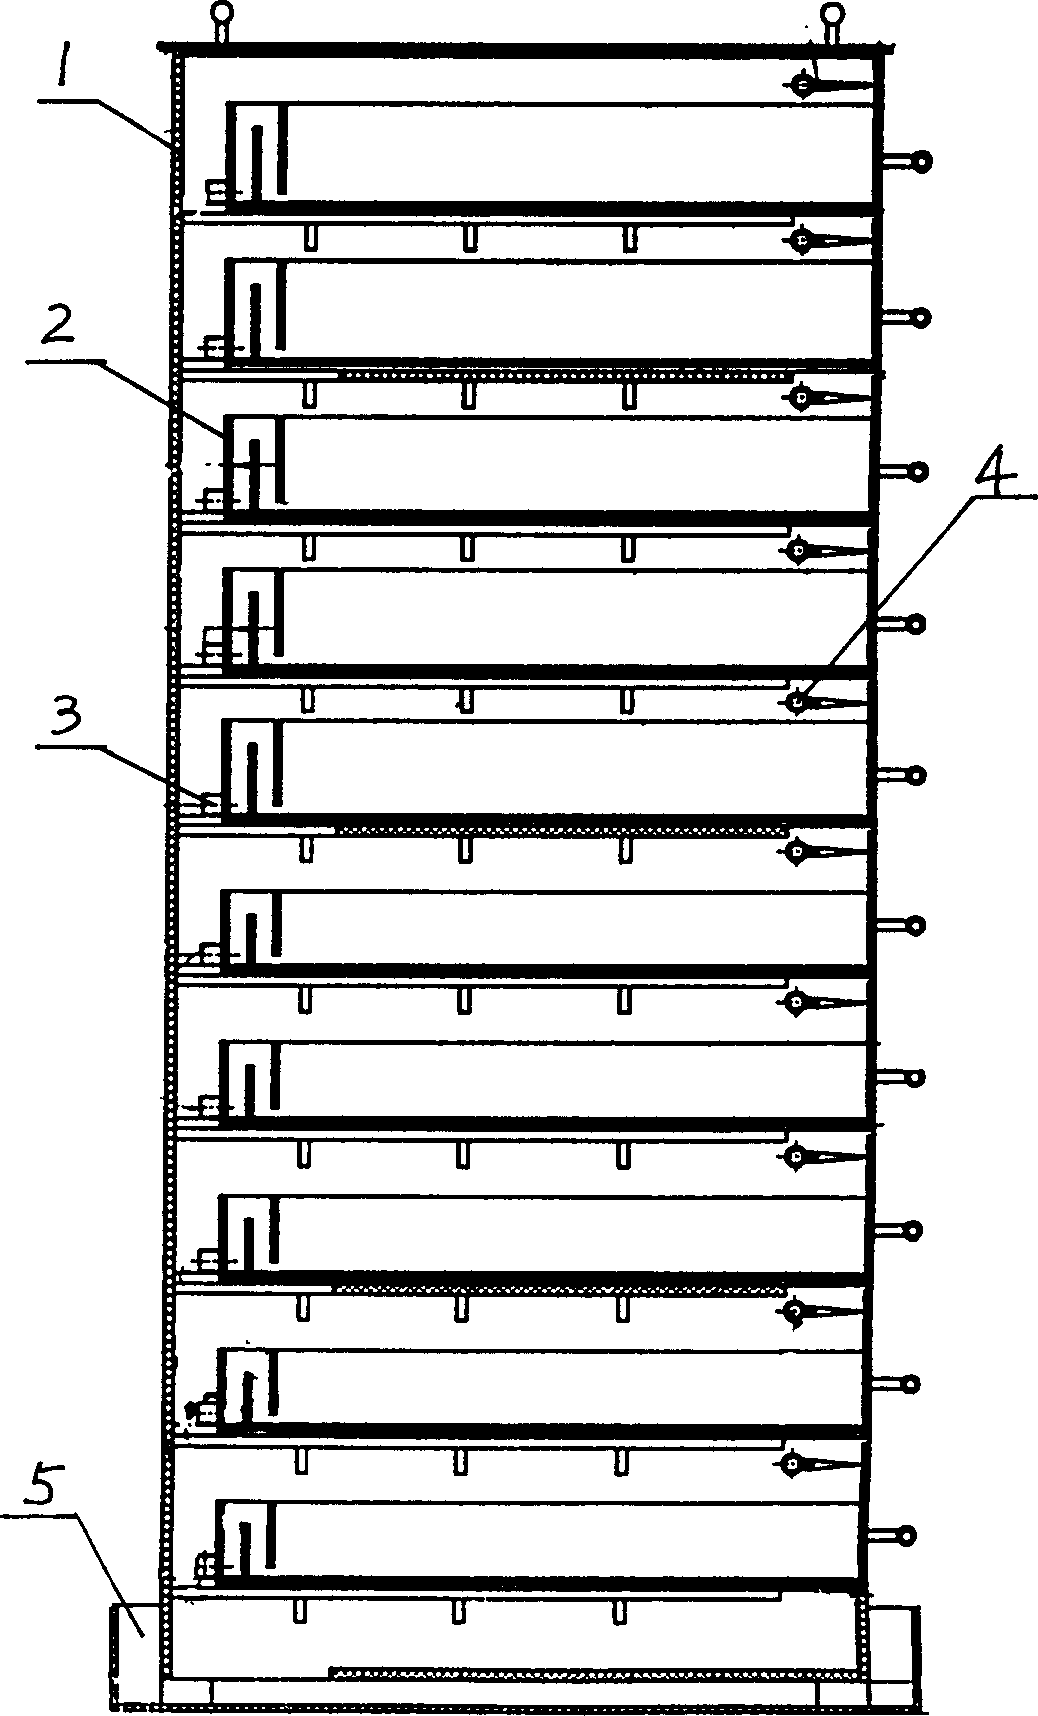 Multi-layer drawer-style culturing device for bottom fauna